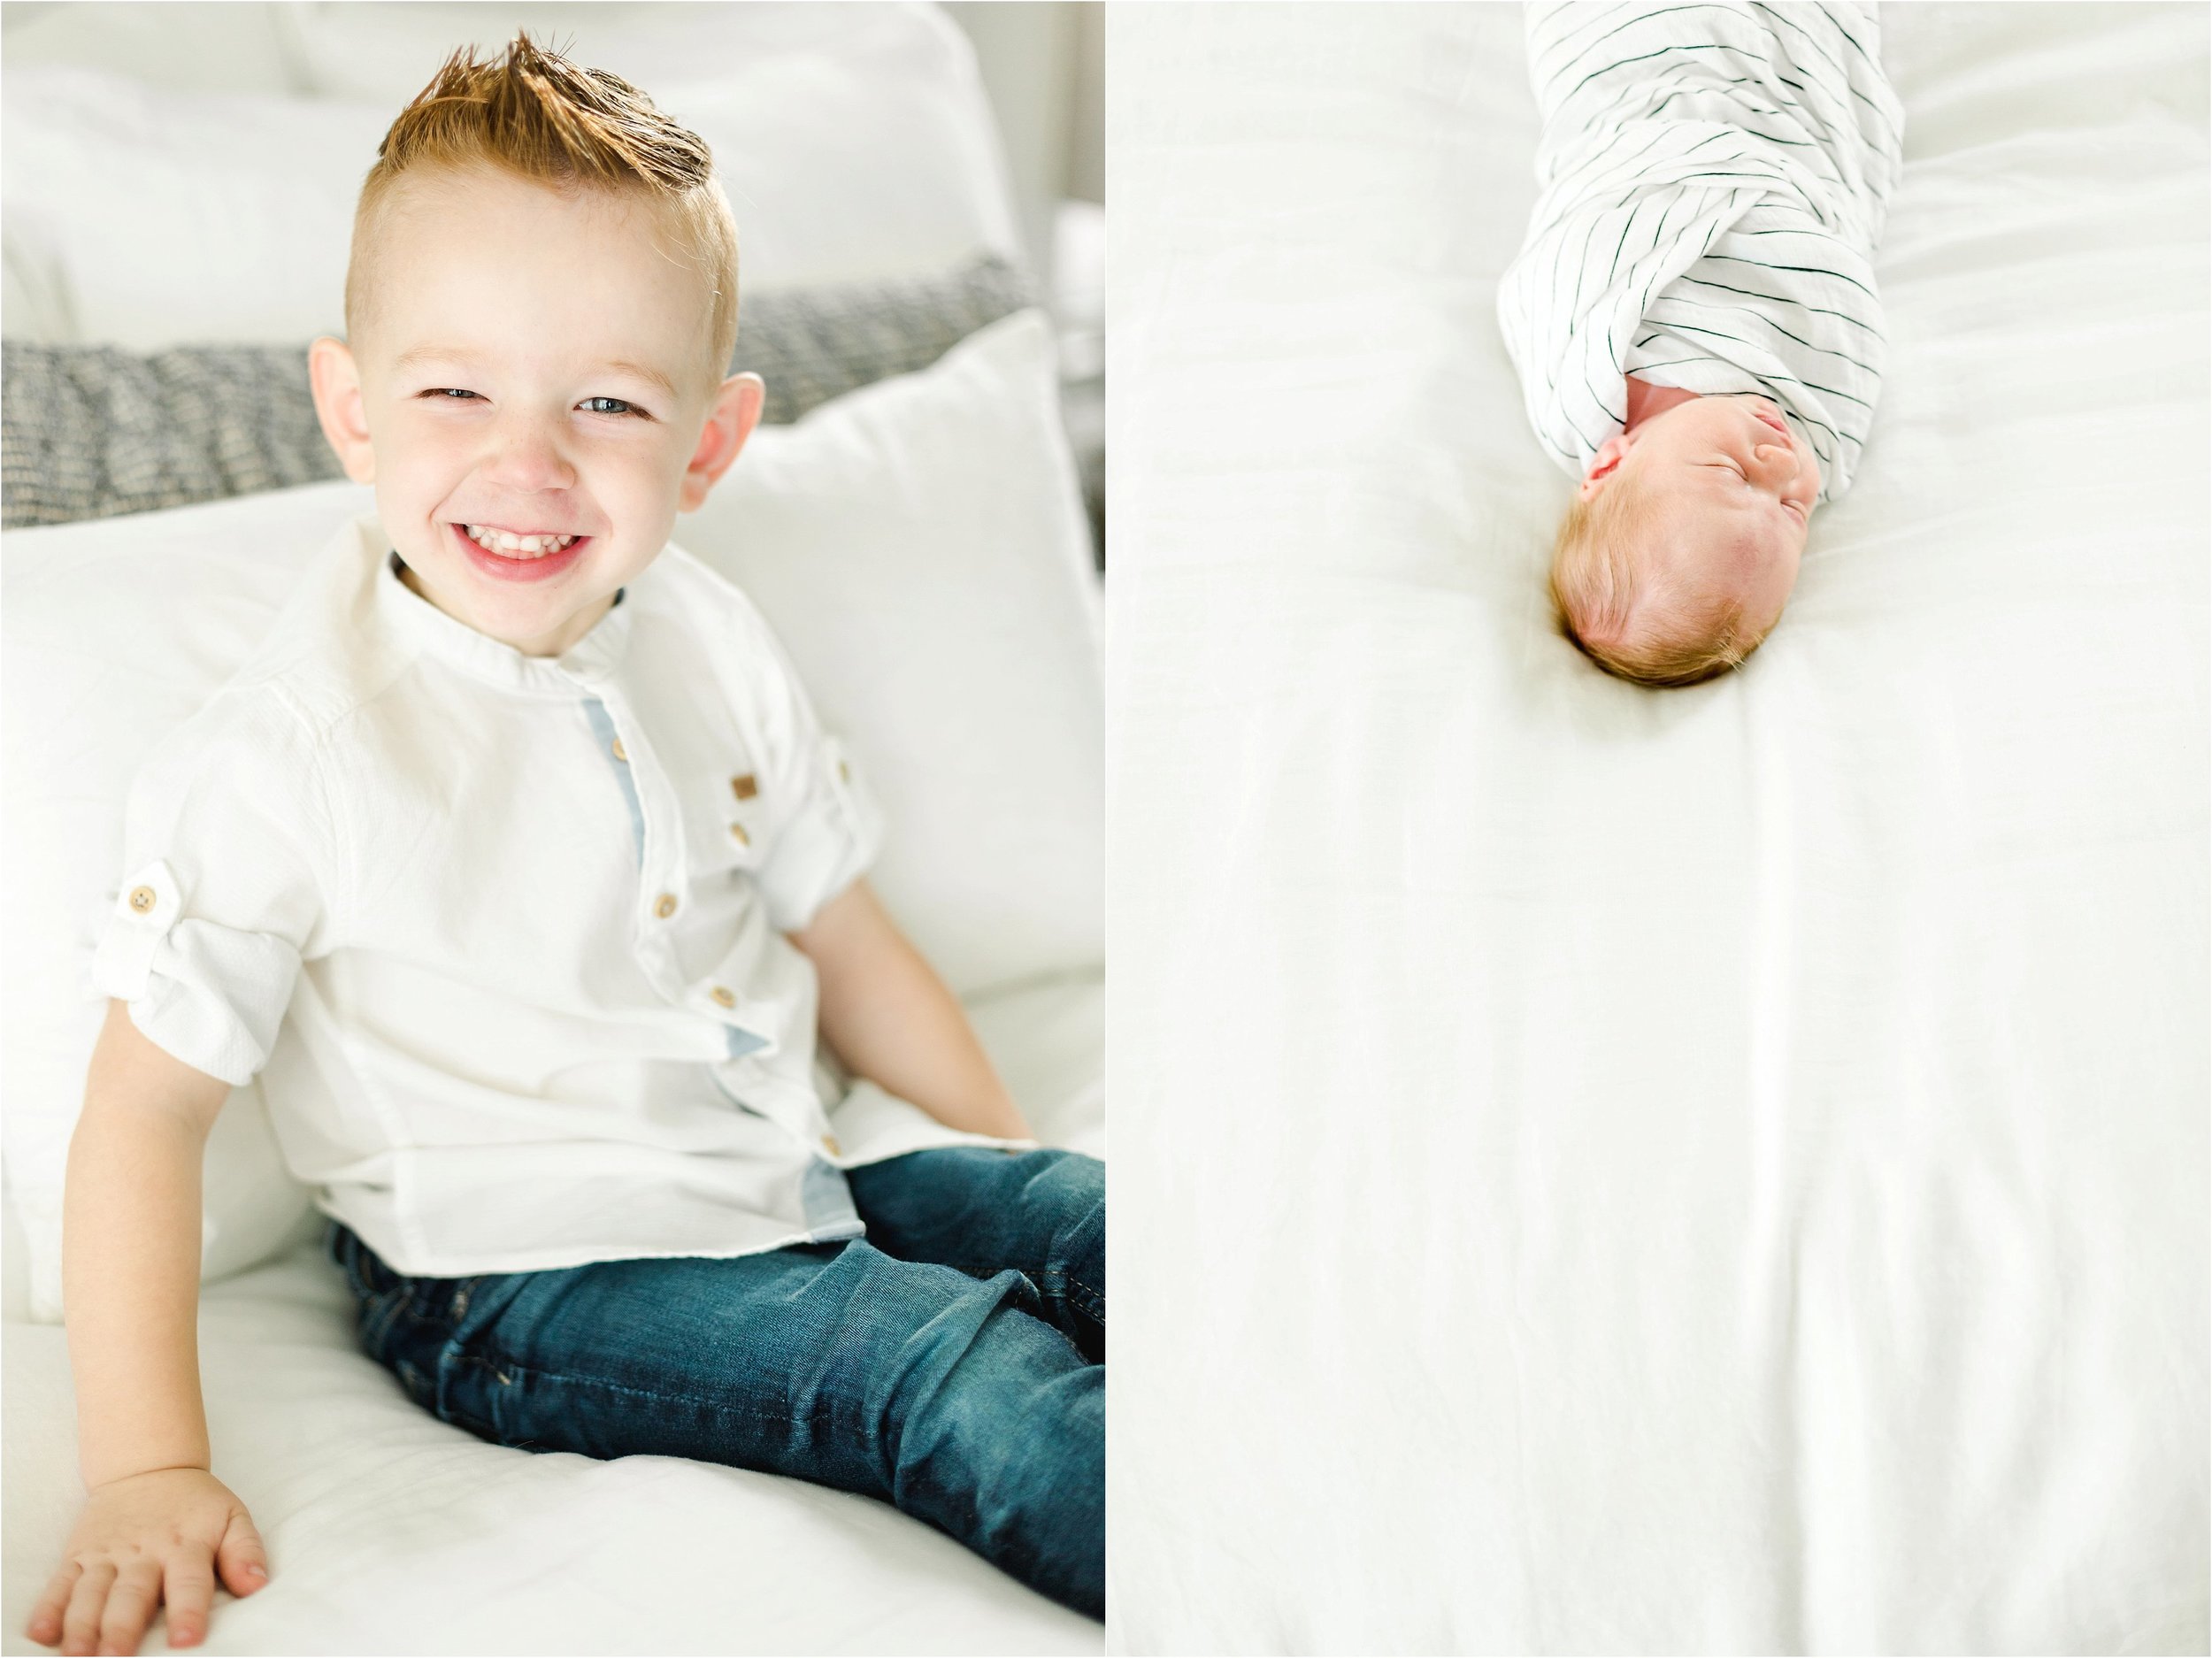 Image on the left shows older brother sitting on a bed and smiling at the camera.  Image on the right shows overhead photo of the baby boy sleeping on the bed.